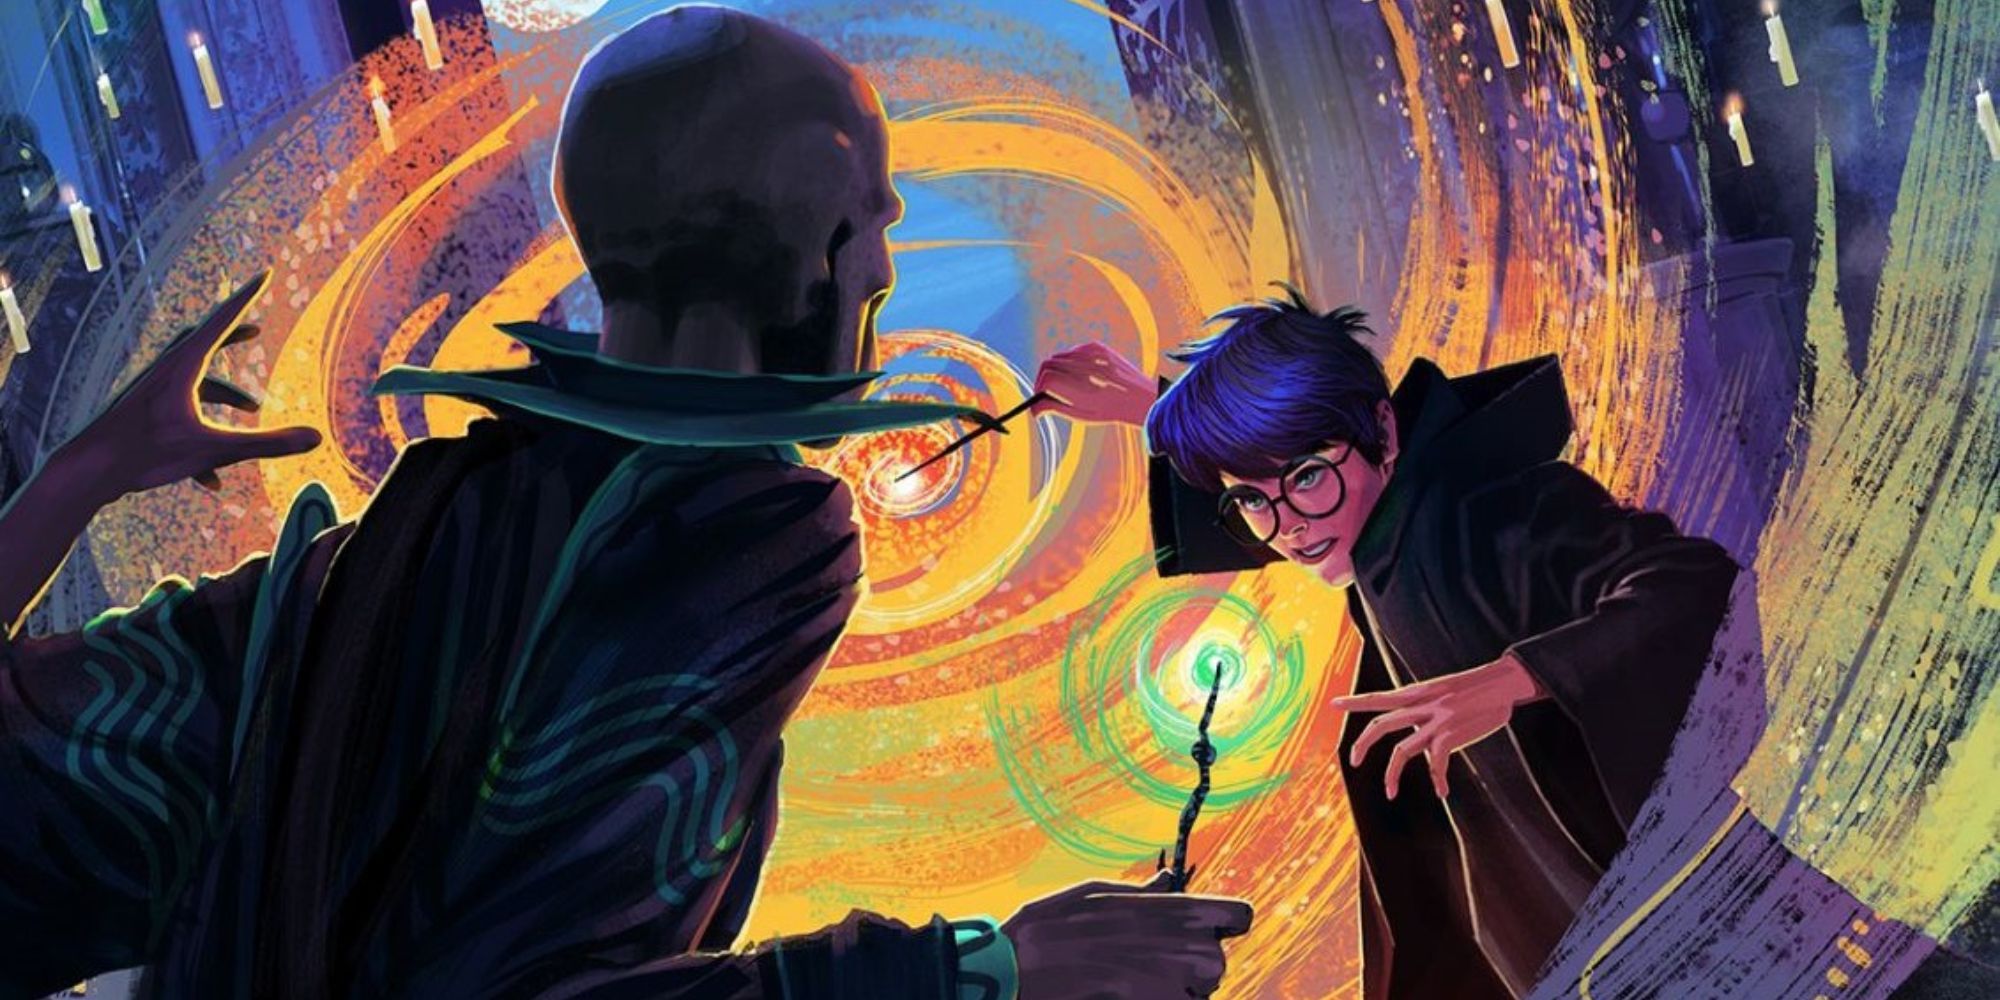 Harry Potter and the Deathly Hallows Book Cover